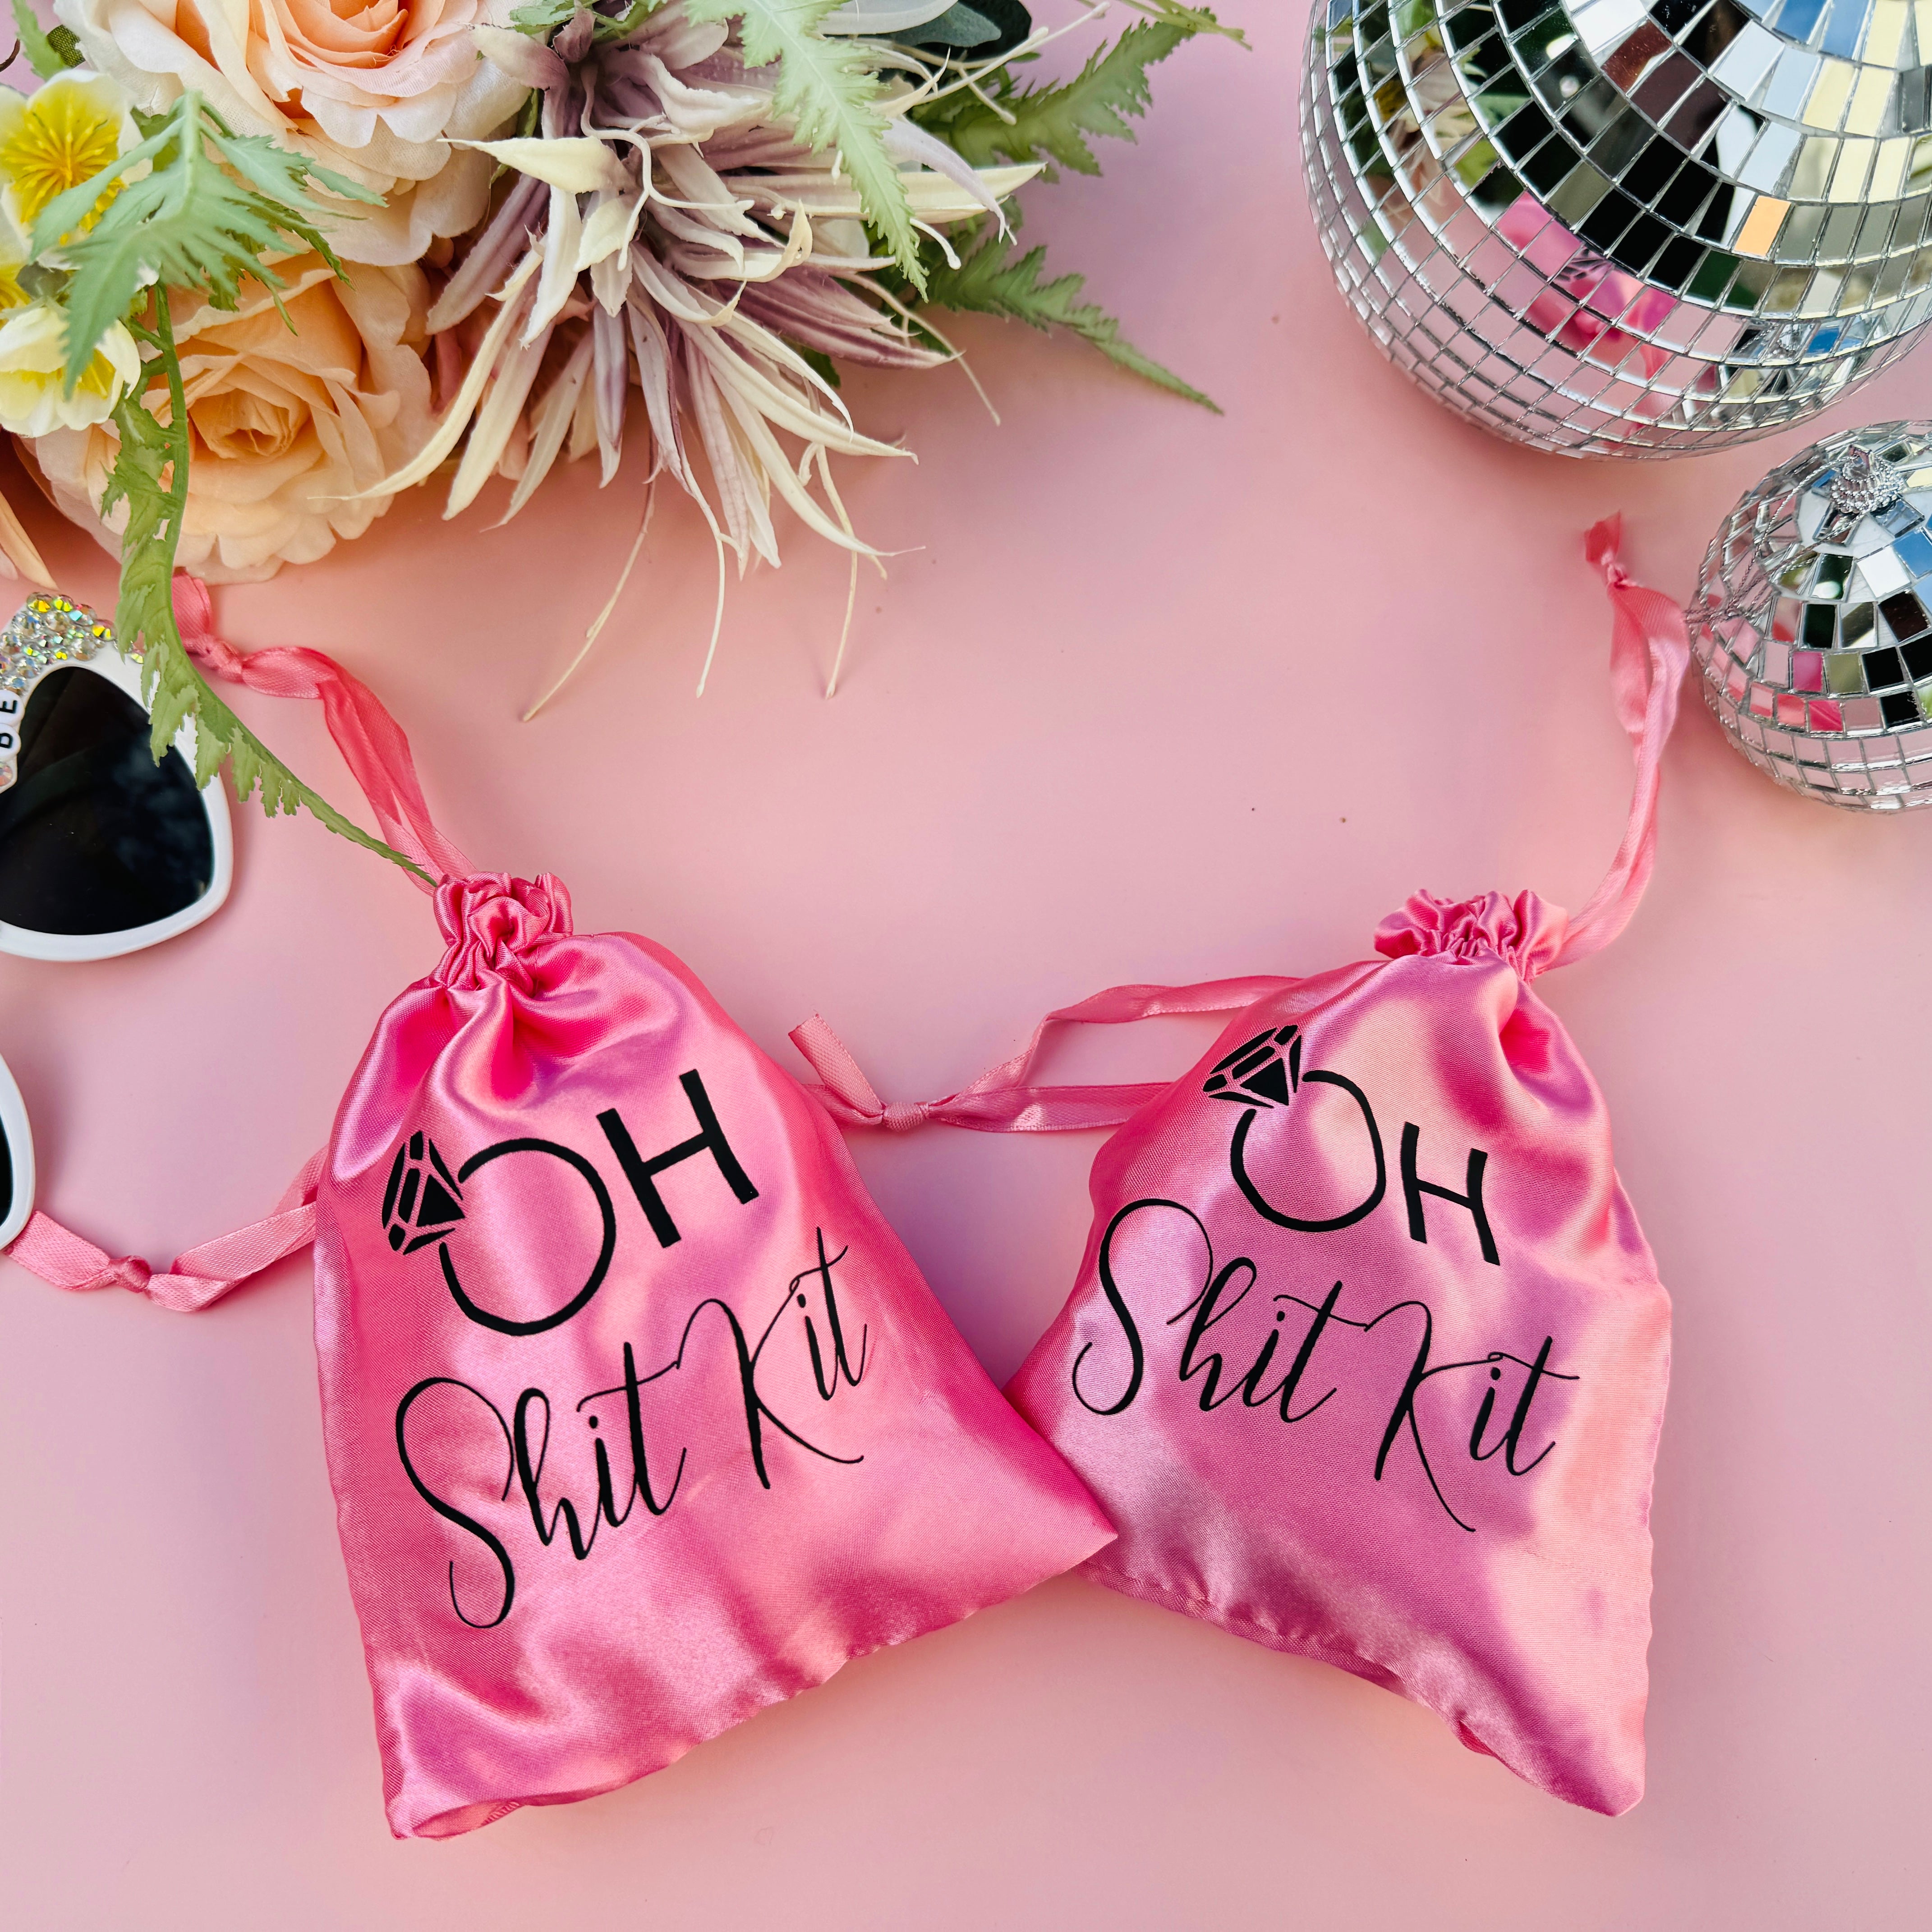 Bachelorette Party Bags - I Regret Nothing Hangover Kit Bags - Hangover Recovery Kit - Bachelorette Party Bags - Hen Party Bags